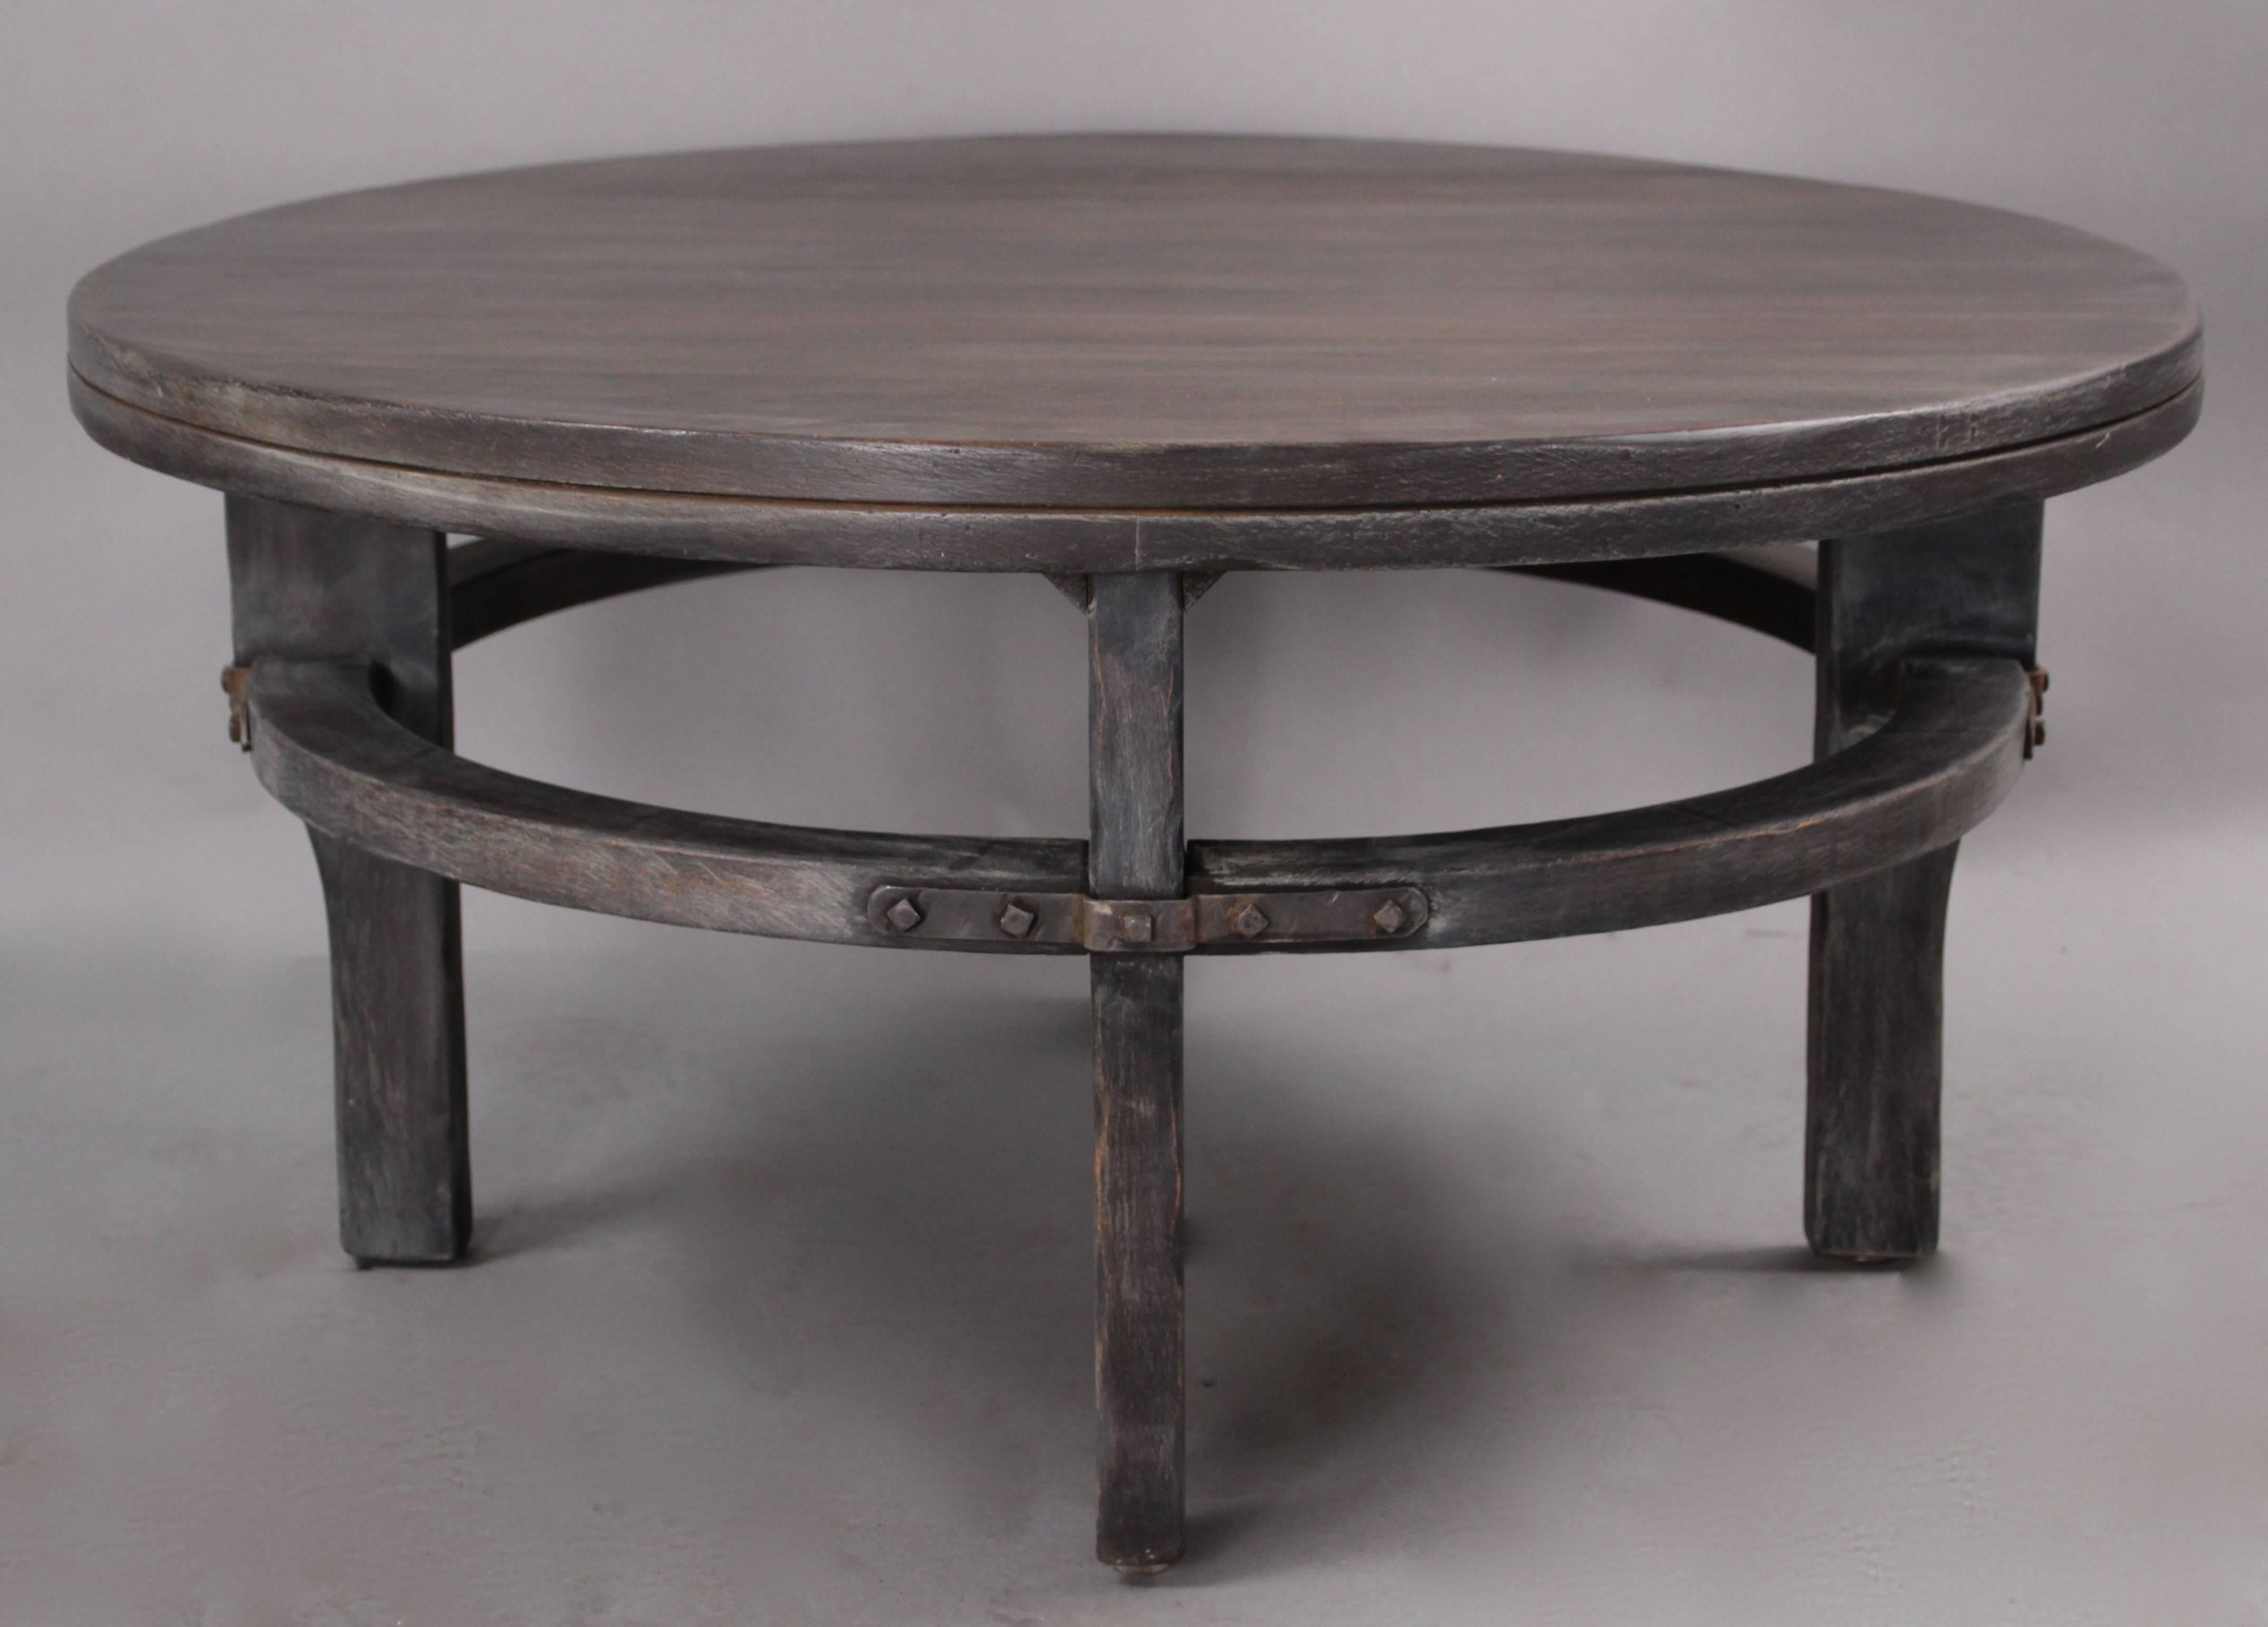 Rancho Monterey 1930s Round Monterey Coffee Table with Old Wood Finish